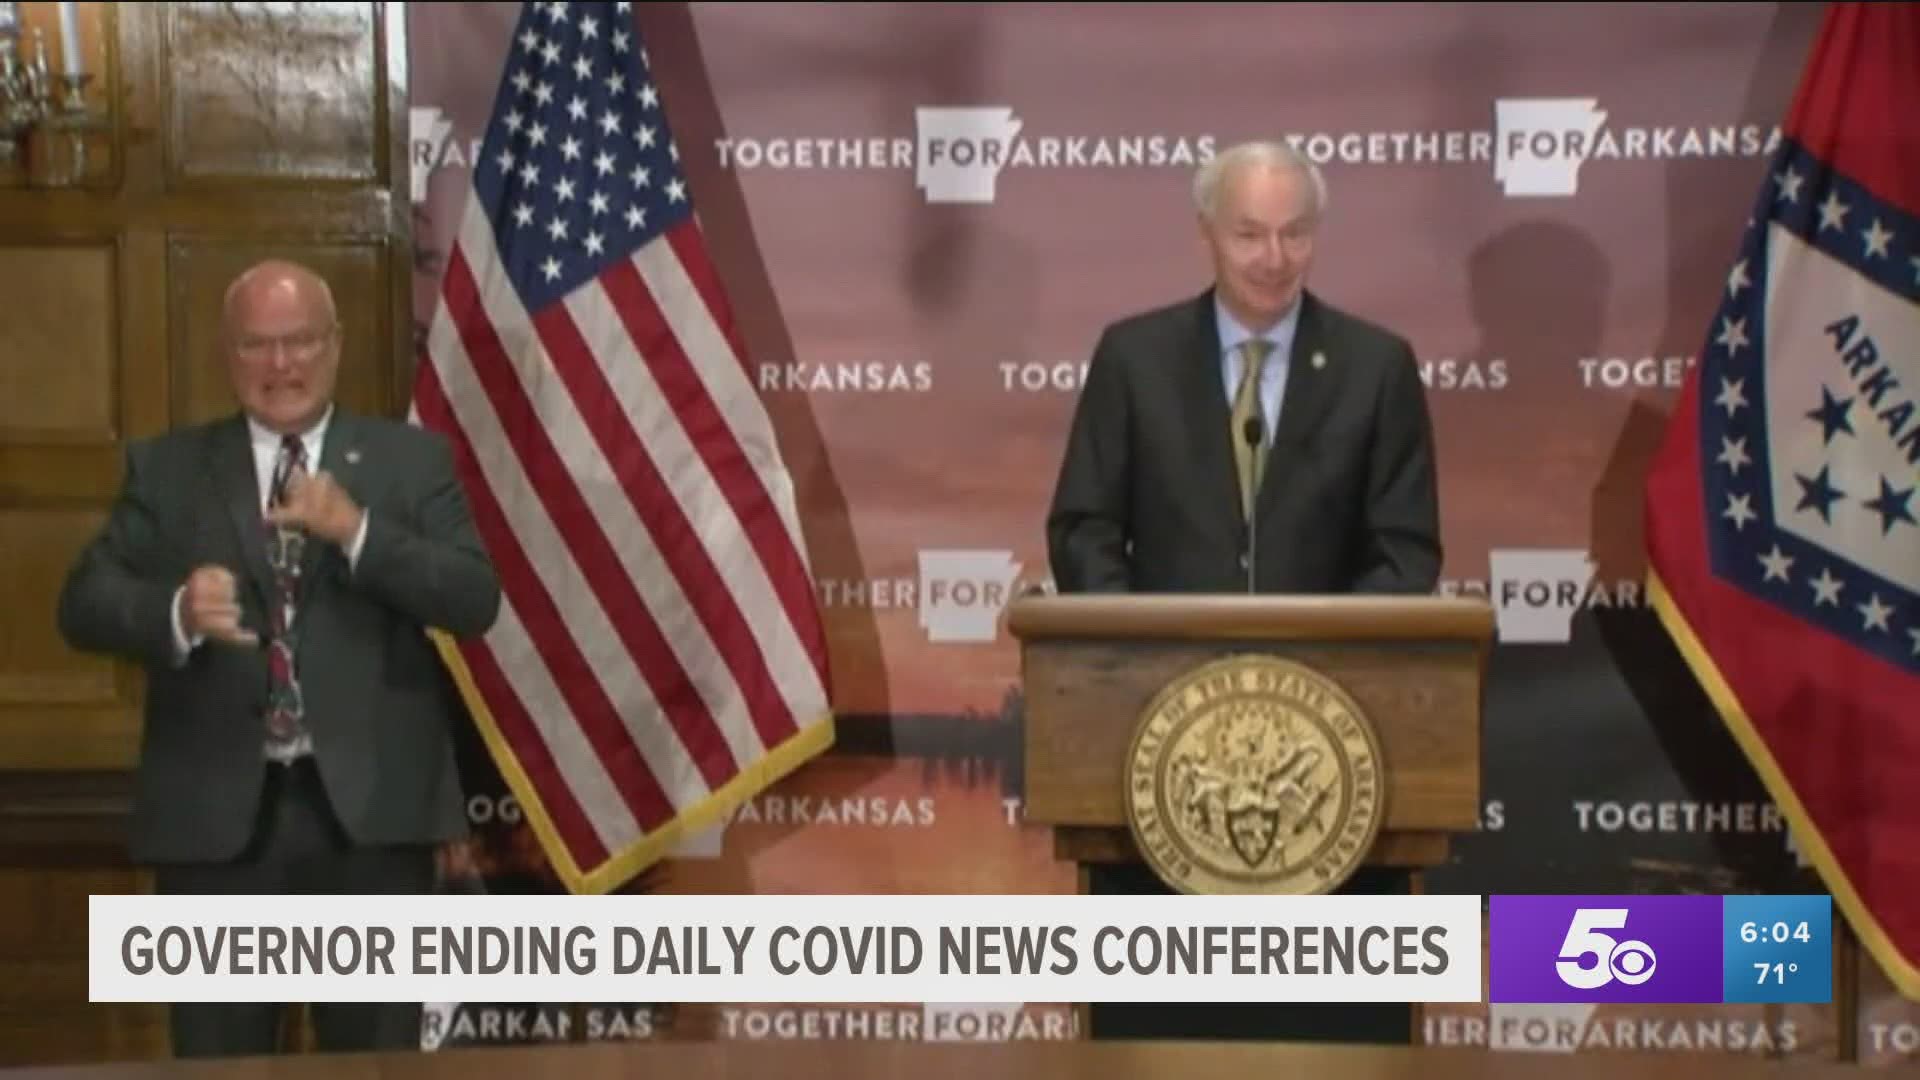 Gov. Asa Hutchinson announced Thursday (Sept. 10) that the state will be halting its daily COVID-19 new briefings. They will now take place weekly or as needed.